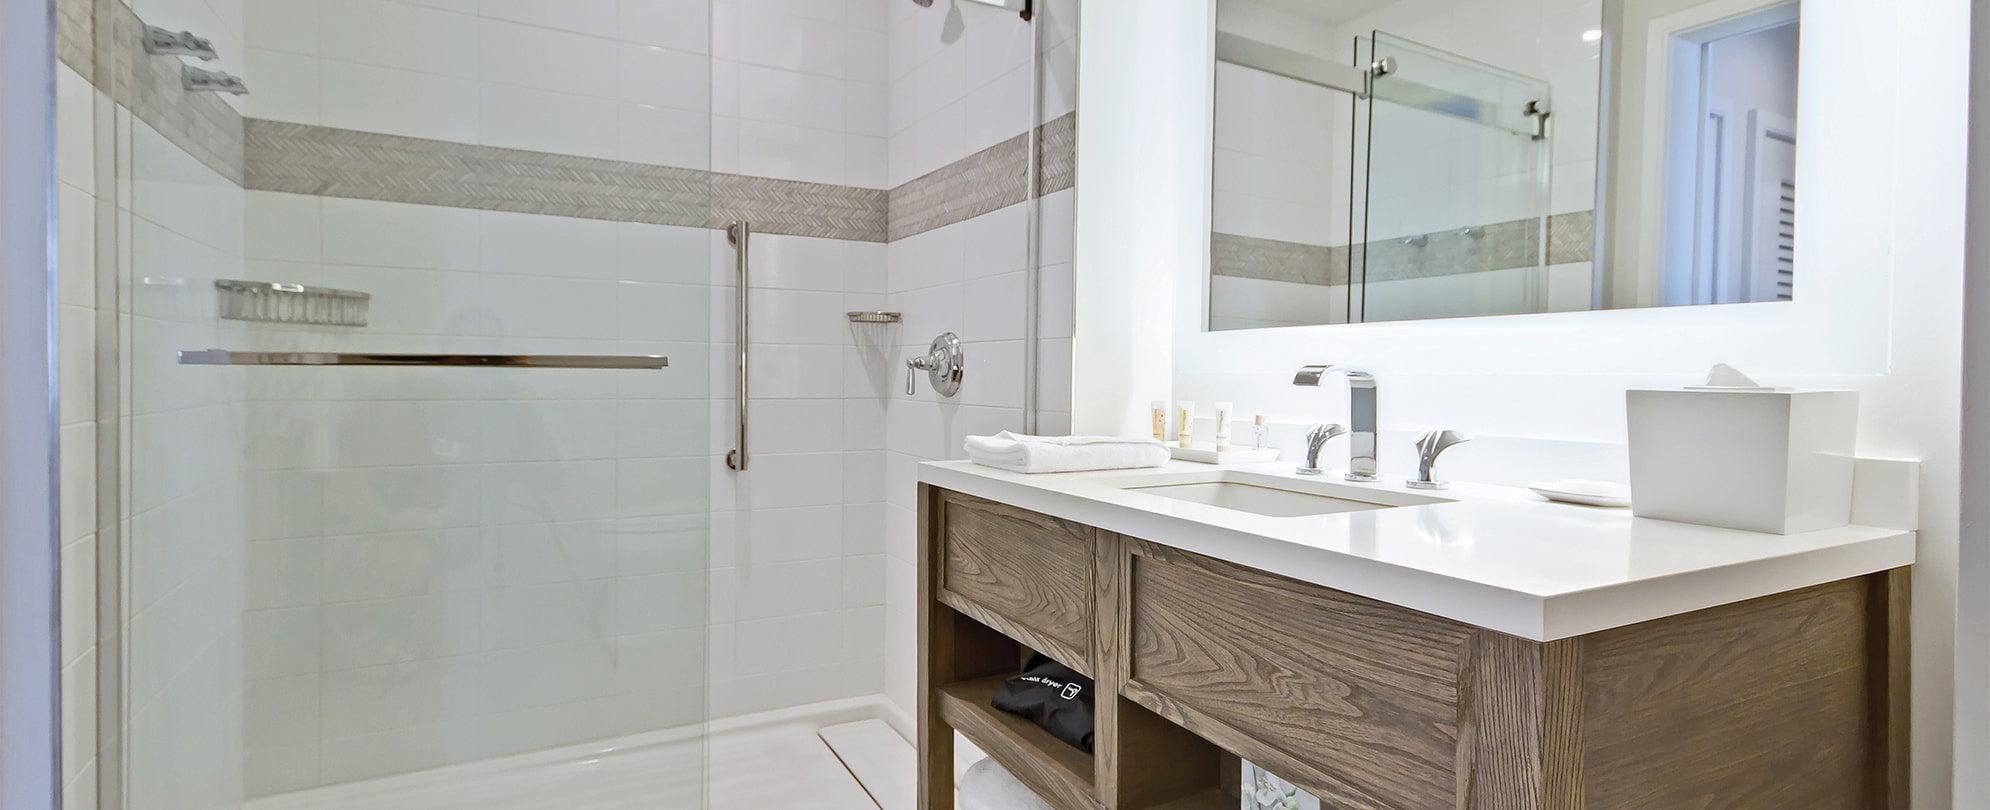 Sink vanity and shower with glass door in a suite bathroom at Margaritaville Vacation Club by Wyndham - Rio Mar.